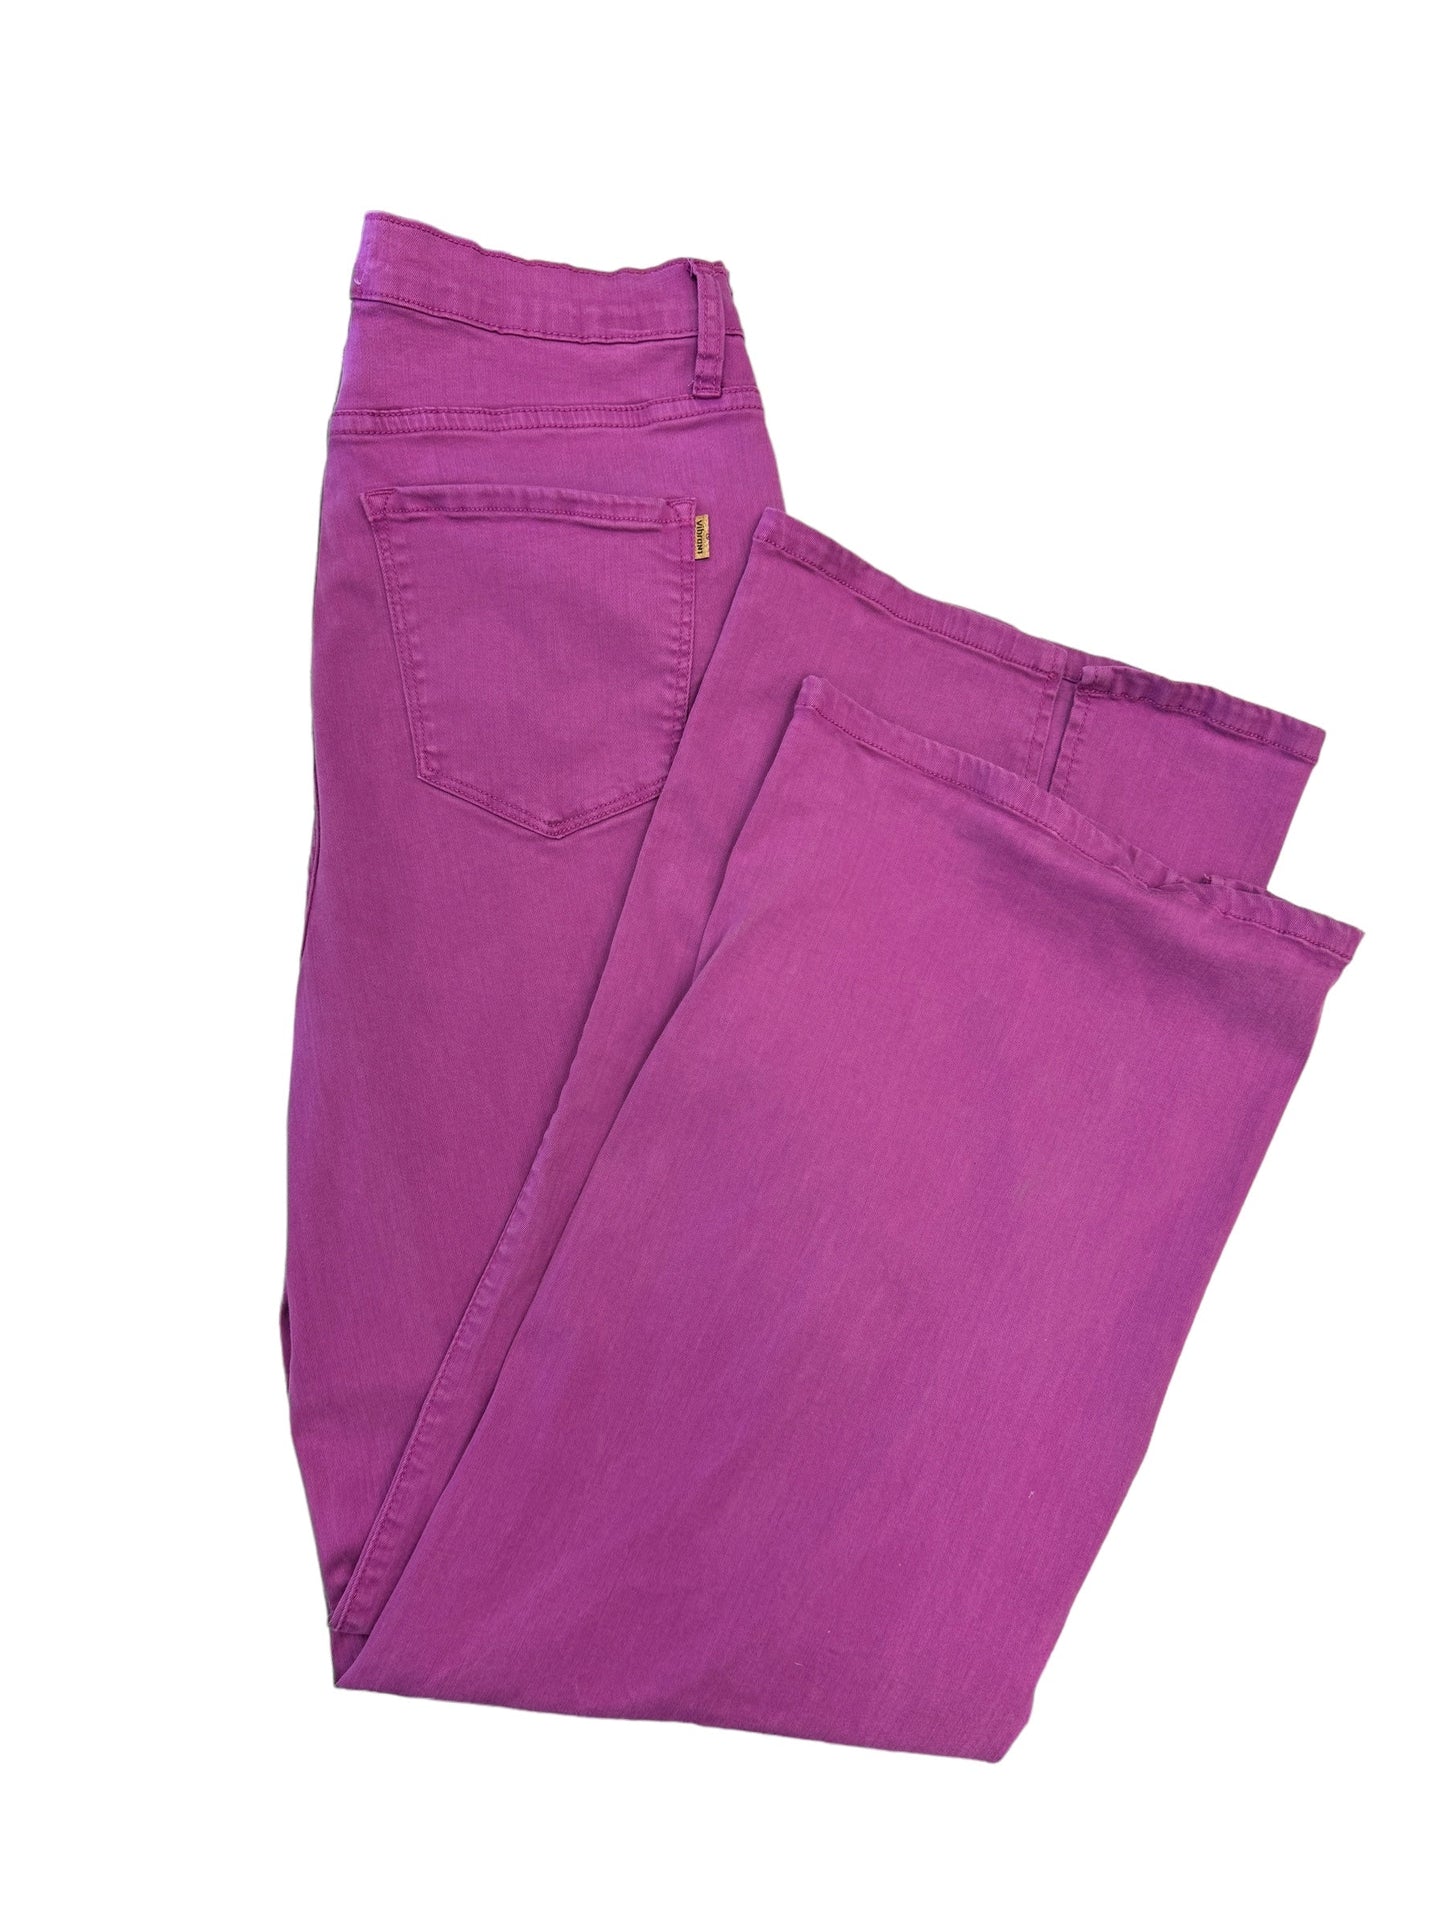 Pants Ankle By Clothes Mentor  Size: 14